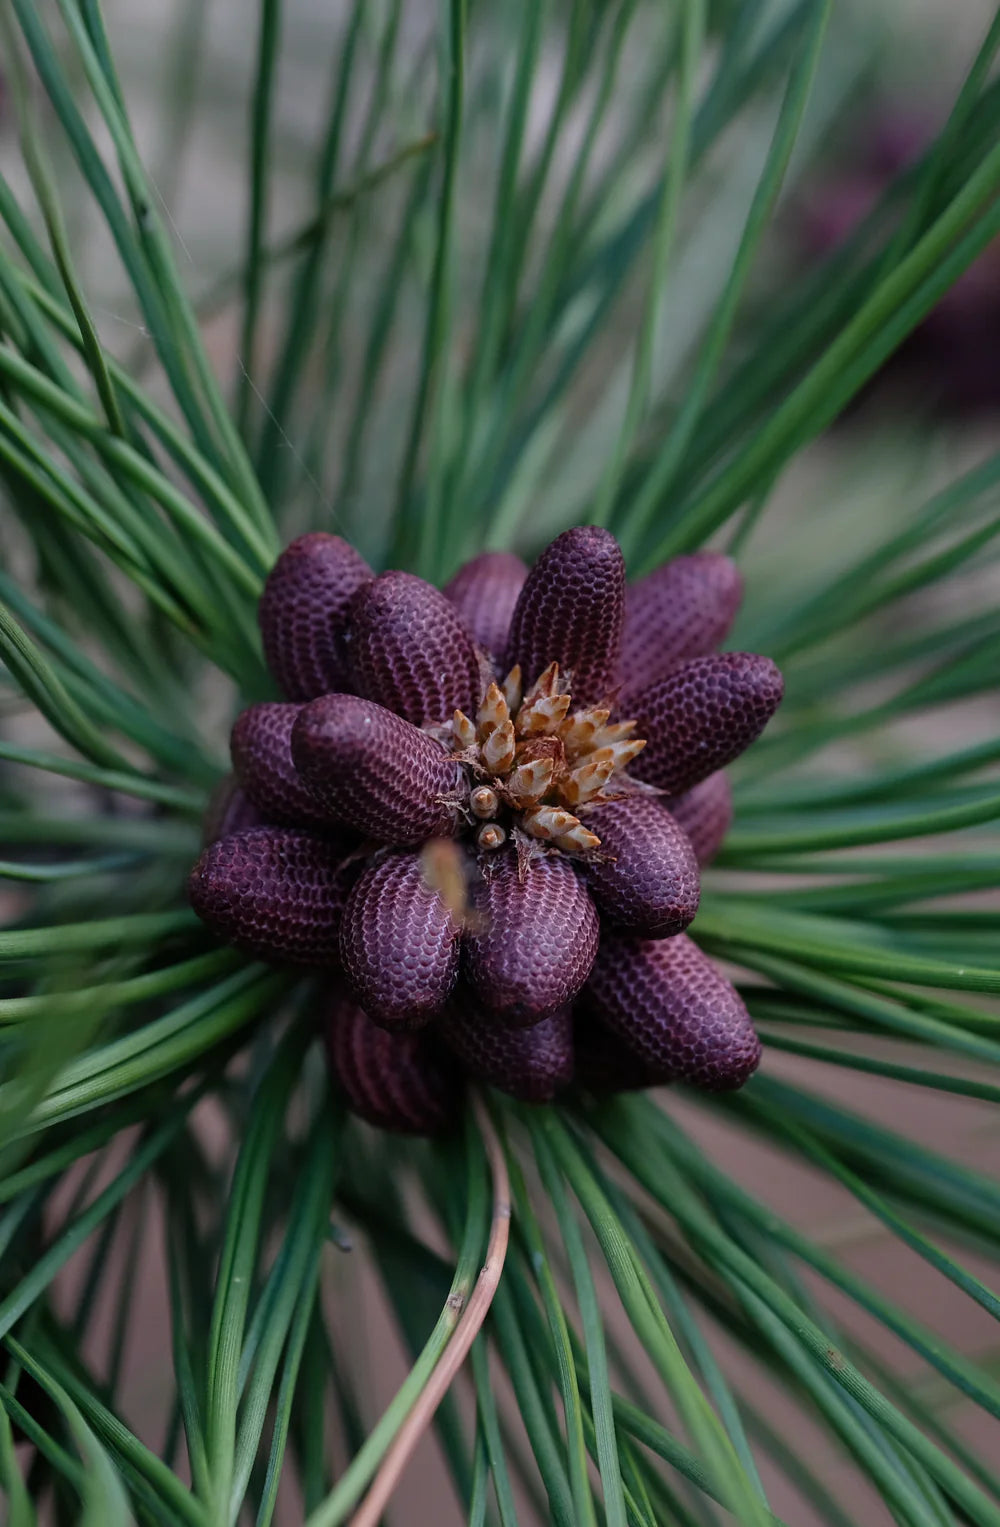 Homegrown Superfood – Wildcrafted Pine Pollen